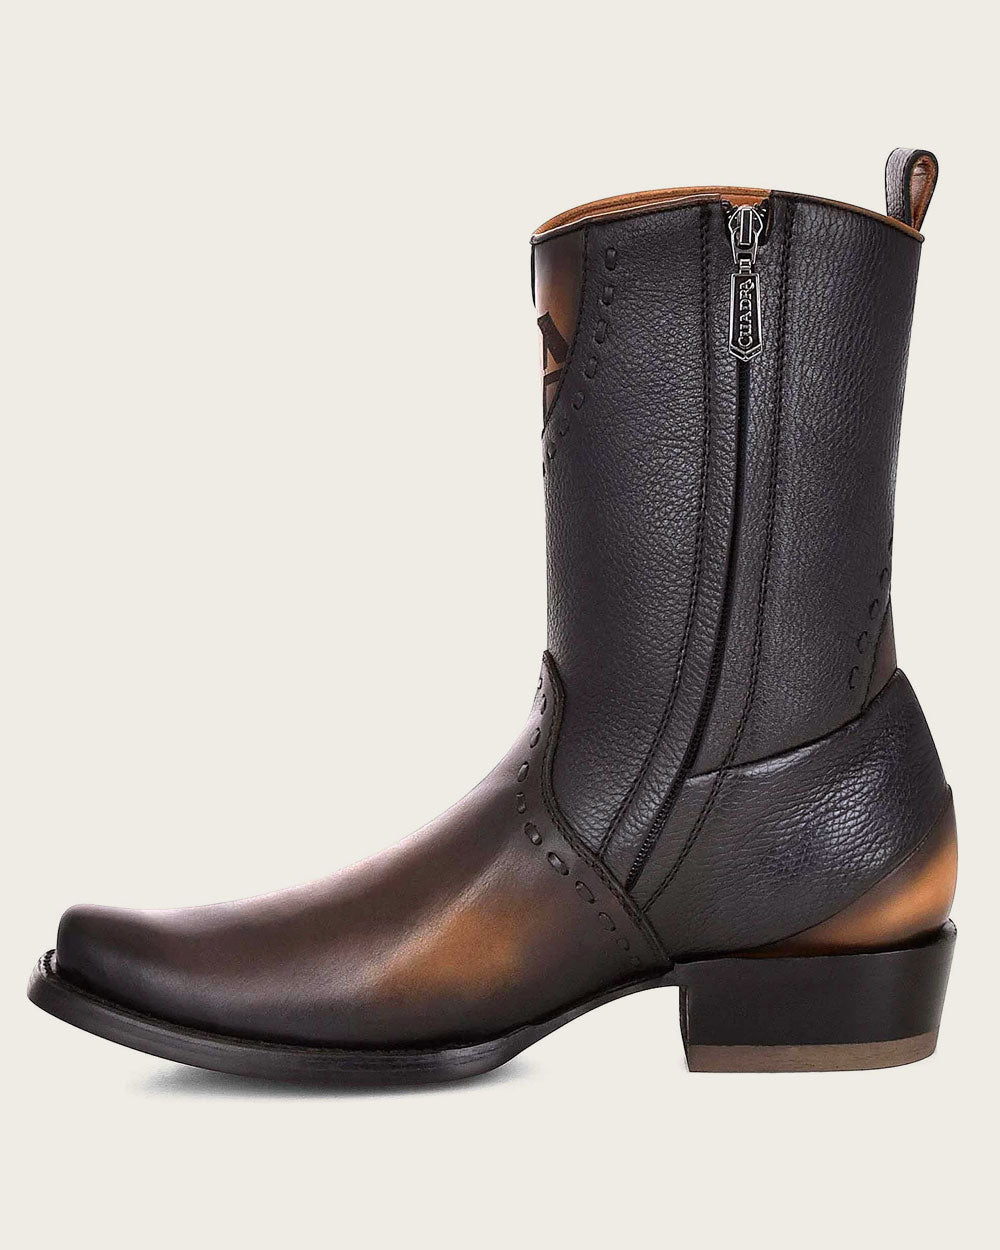 Easy On & Off: Cuadra boots with inner zipper for convenience. (